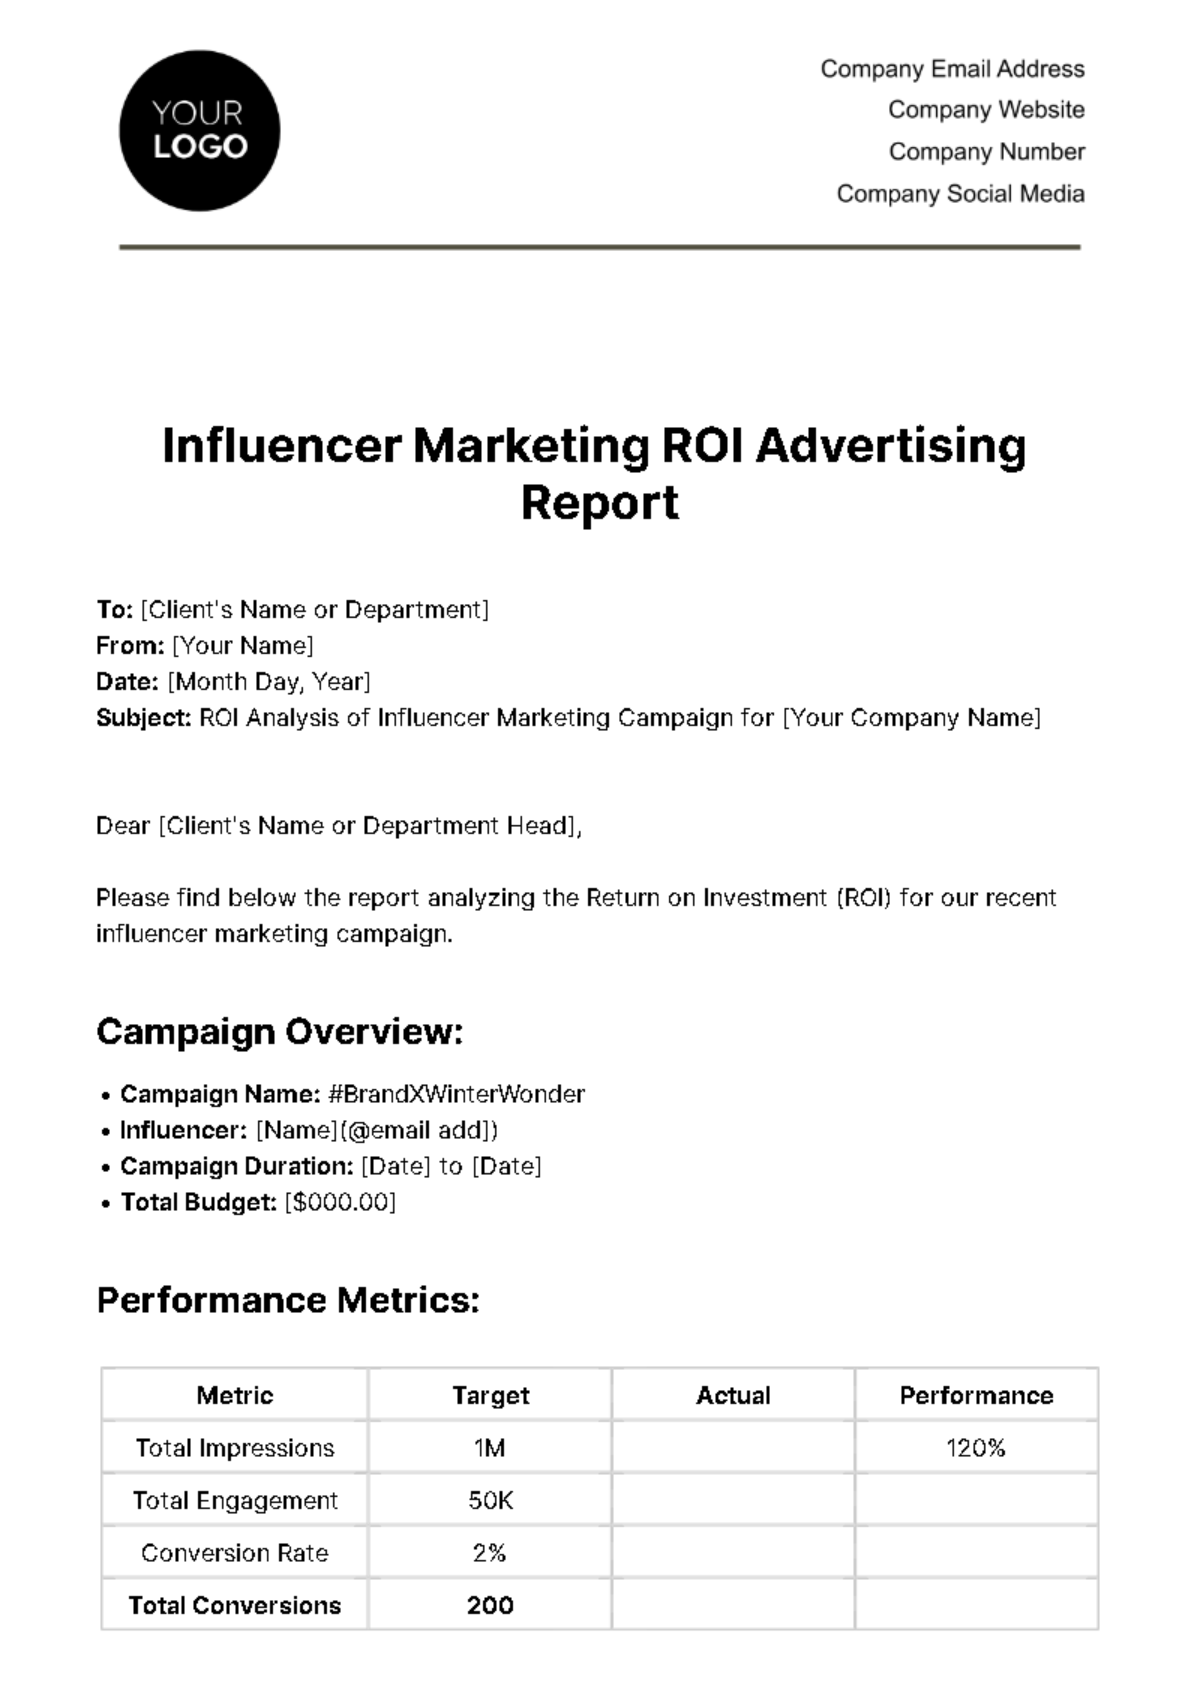 Free Influencer Marketing ROI Advertising Report Template